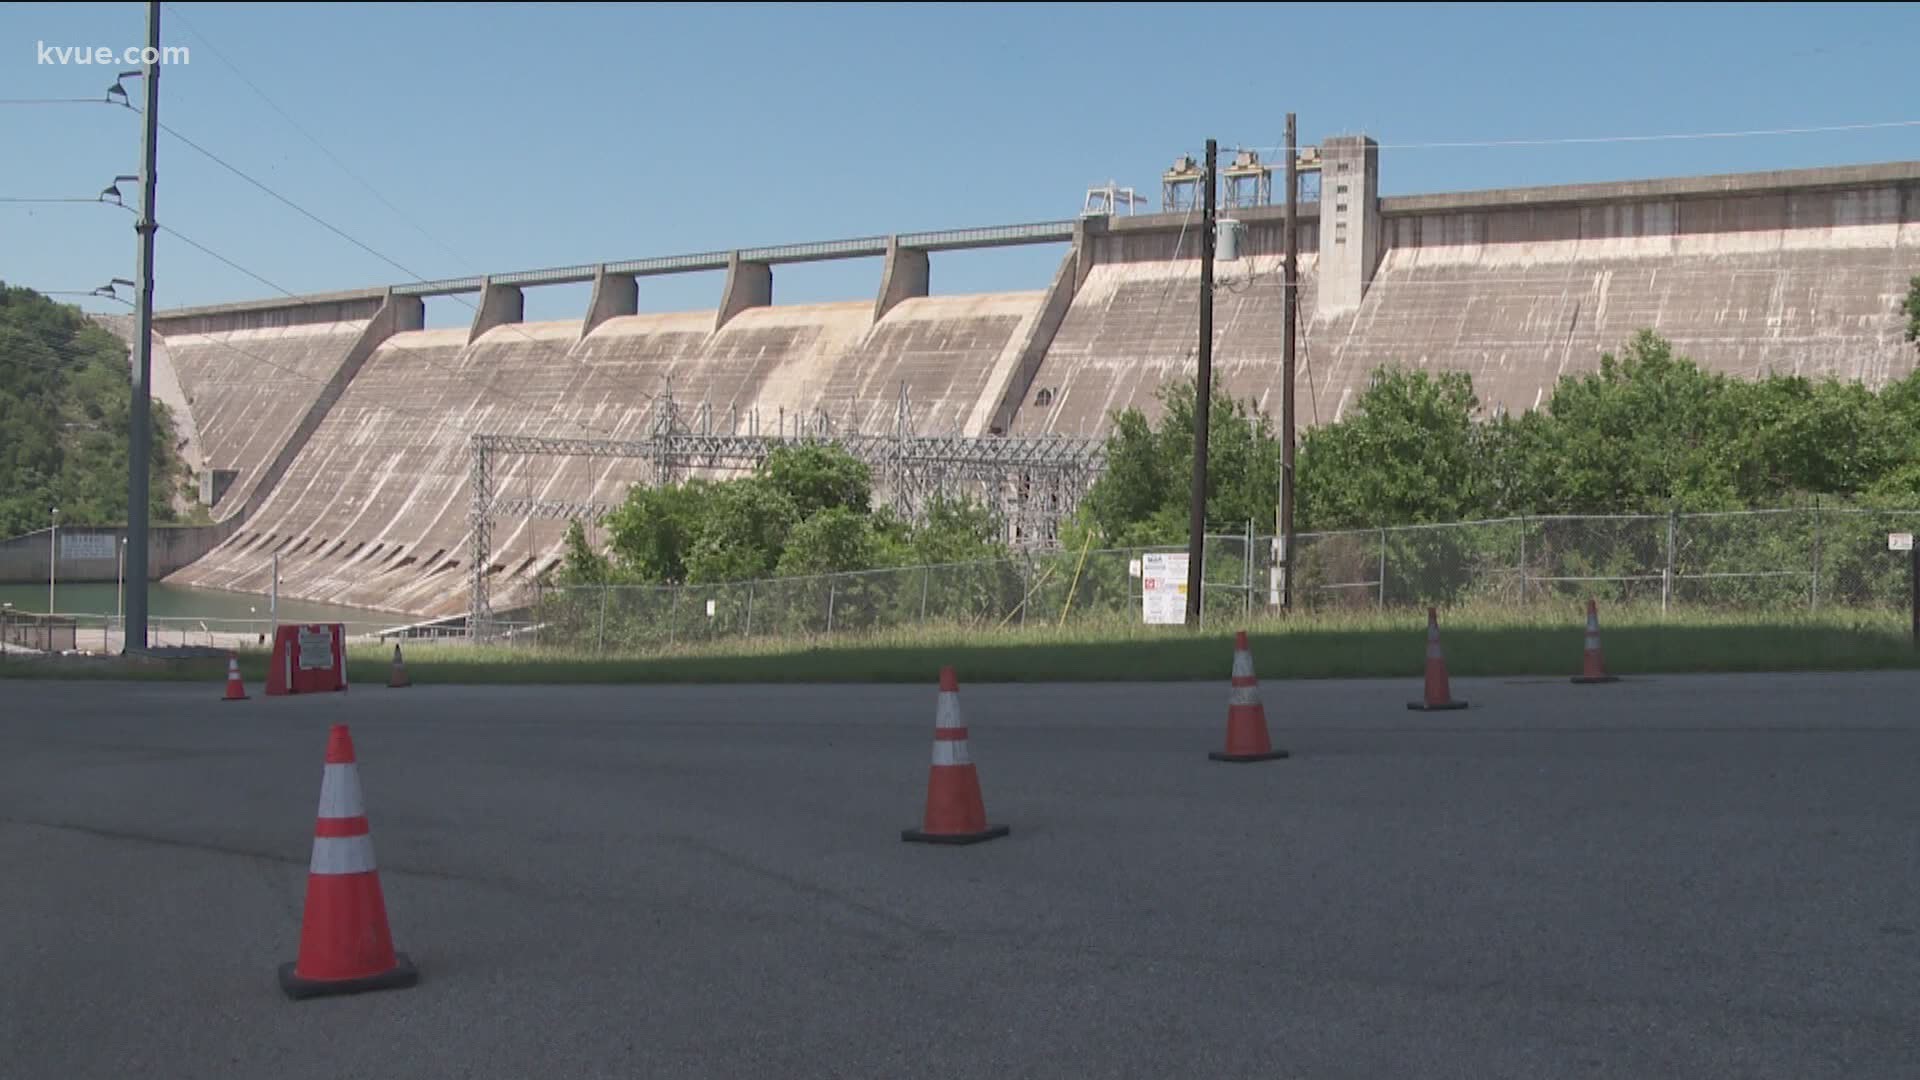 Parts of Central Michigan are underwater after torrential rainfall caused multiple dams to collapse. We looked into what keeps Texas dams safe.